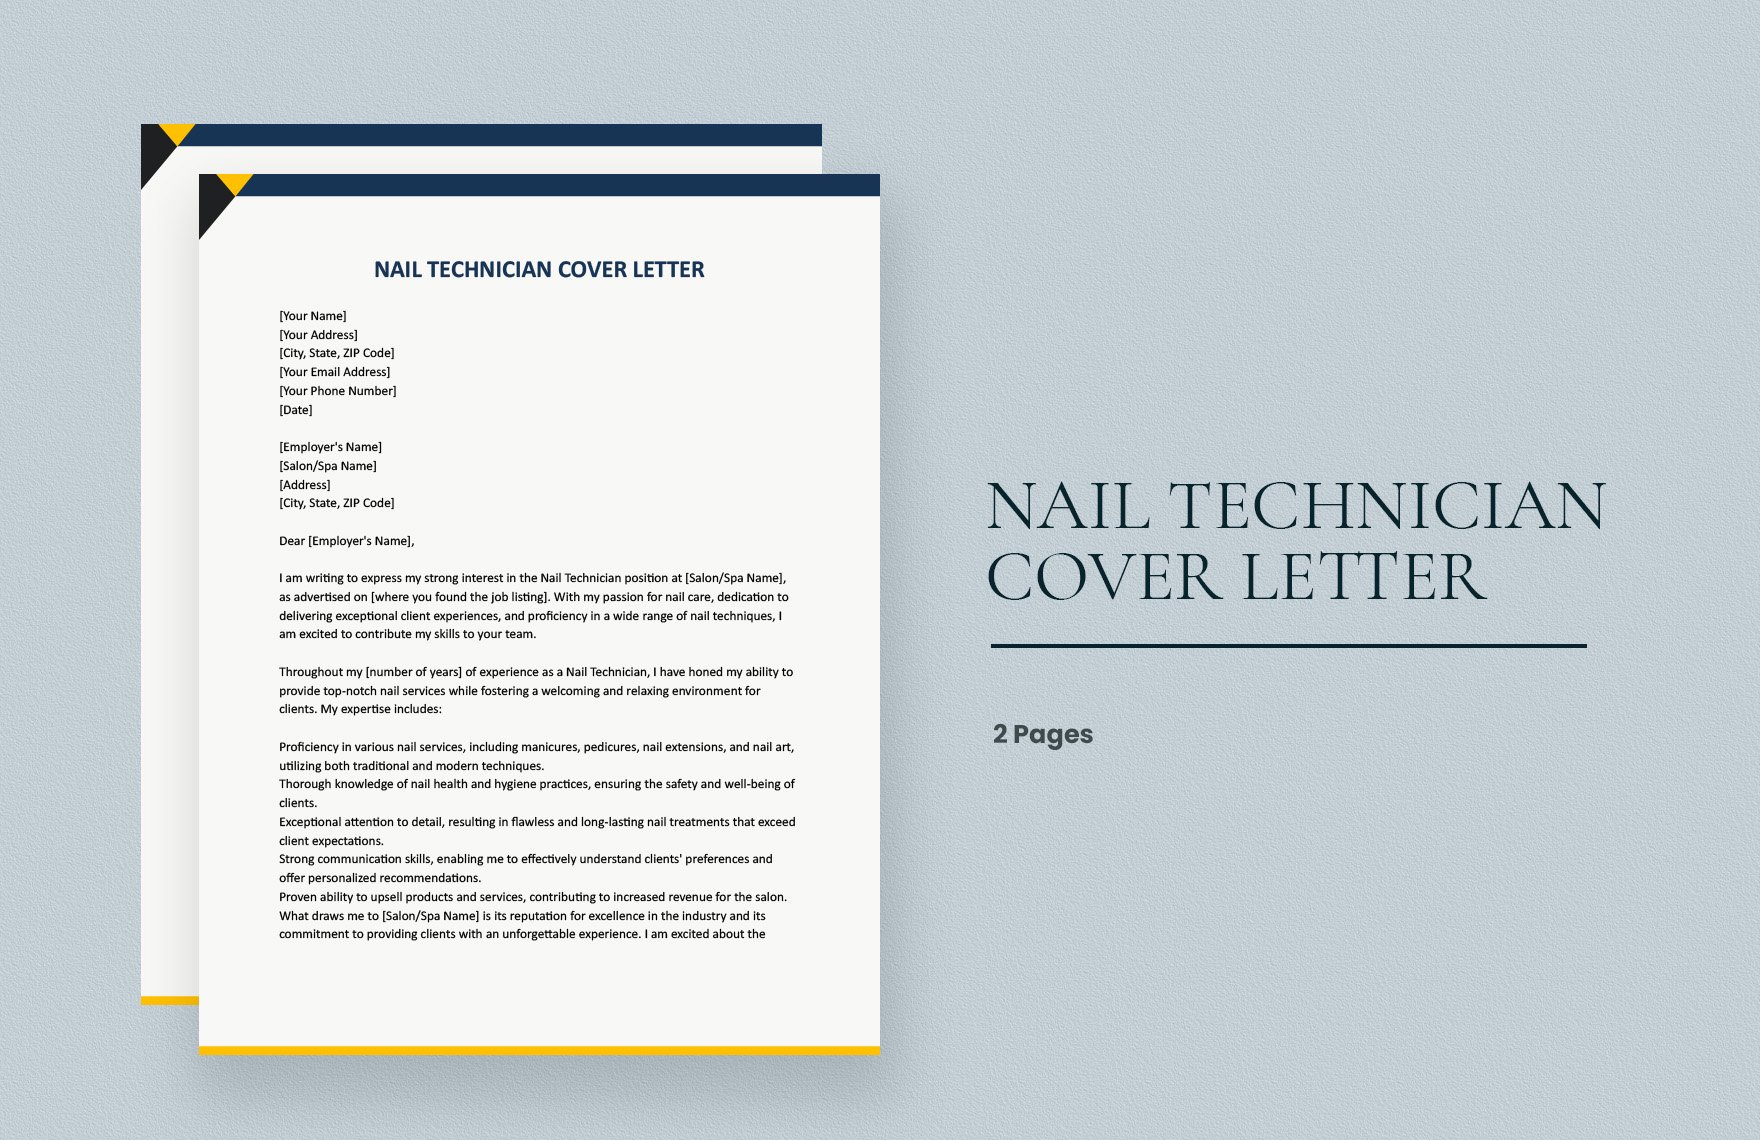 Nail Technician Cover Letter in Word, Google Docs